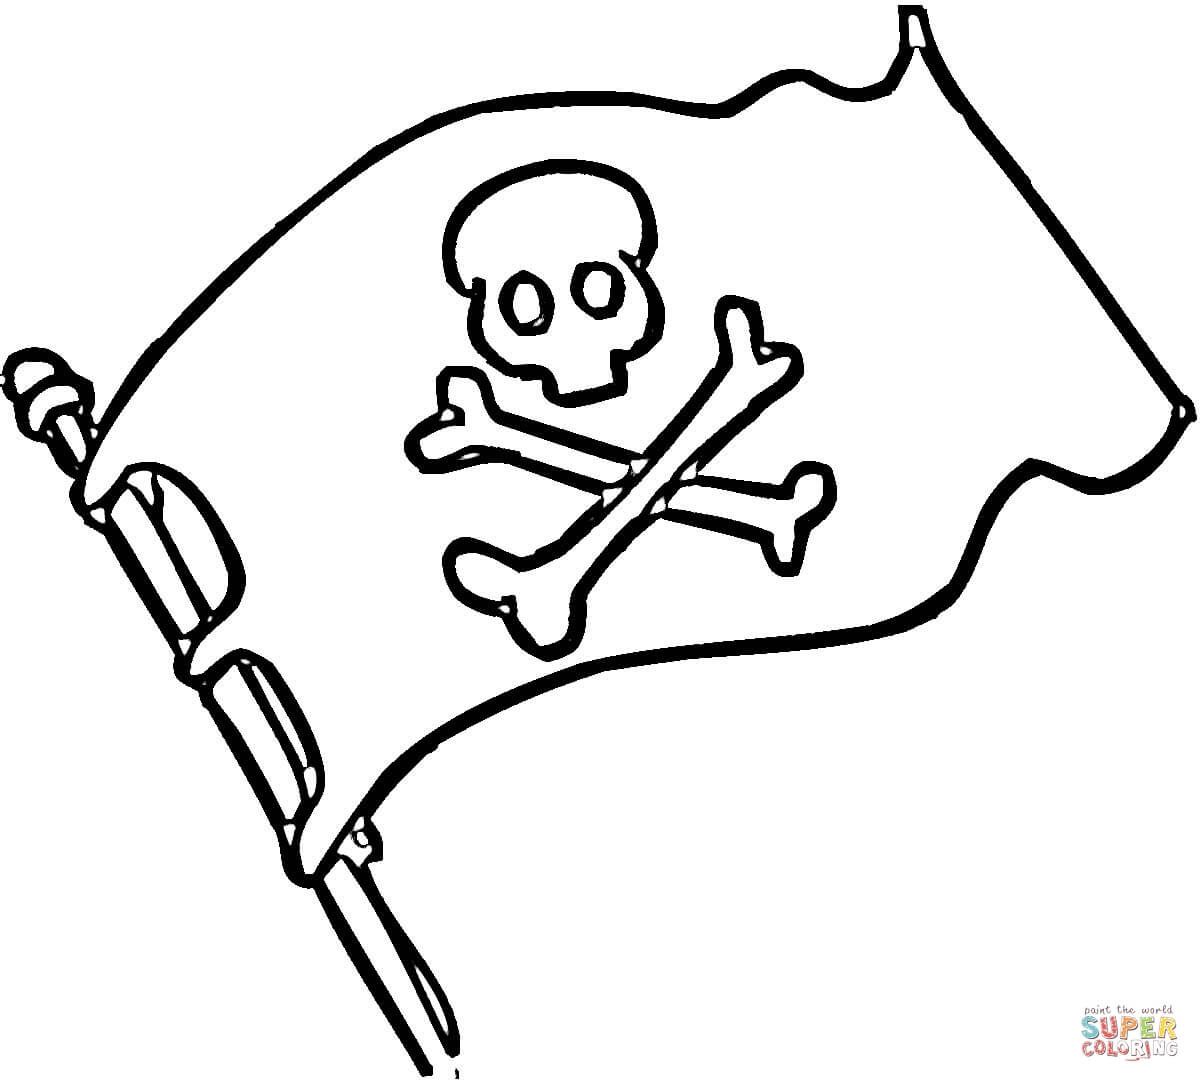 Pirate flag printable coloring pages sketch coloring page flag coloring pages pirate coloring pages pirate flag